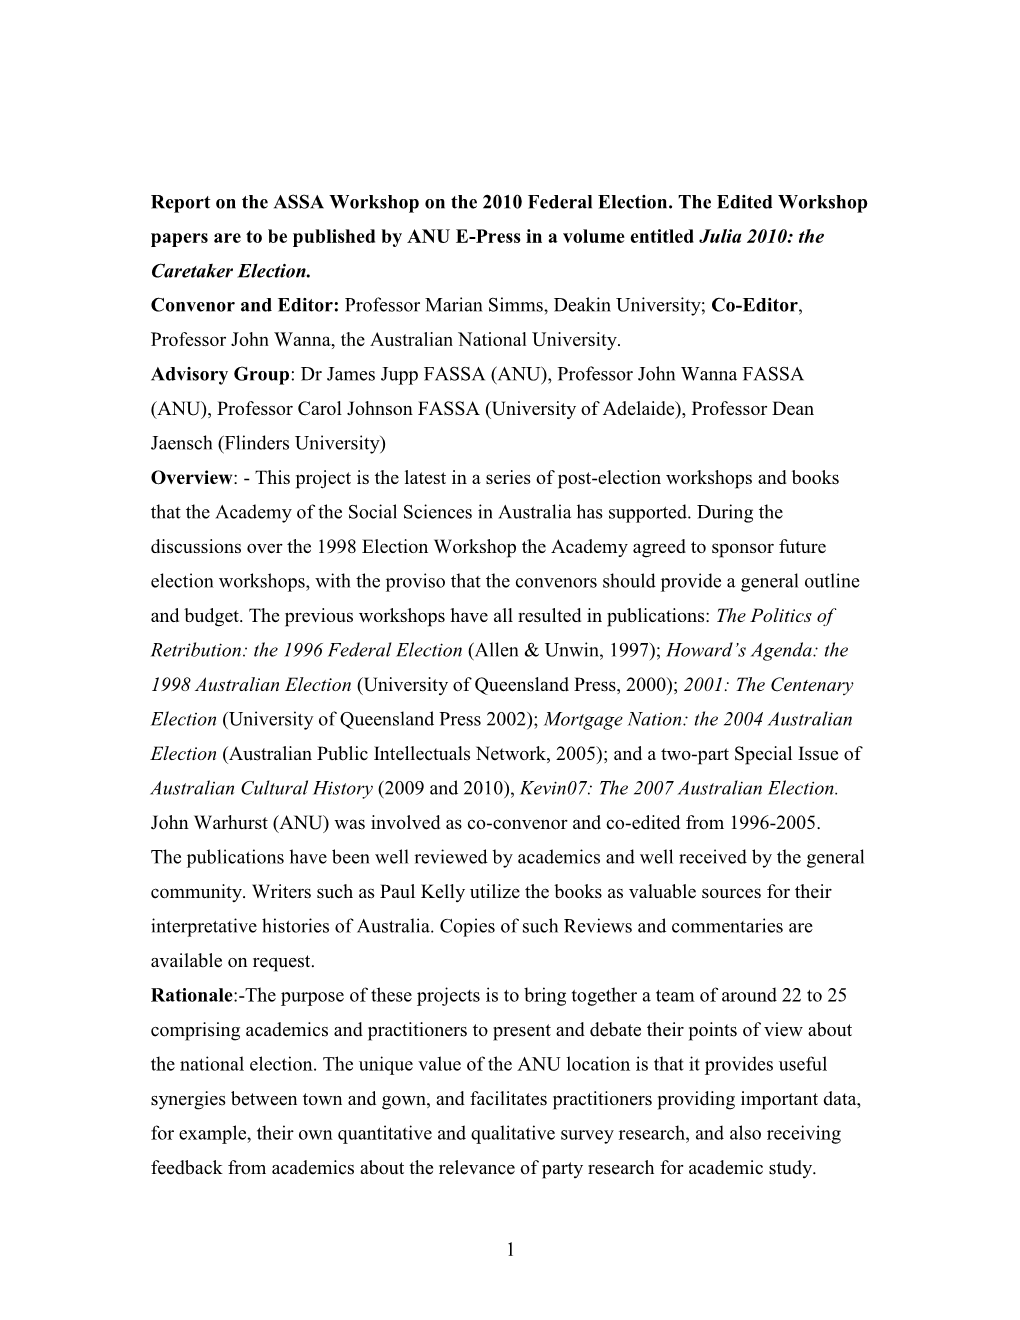 1 Report on the ASSA Workshop on the 2010 Federal Election. The